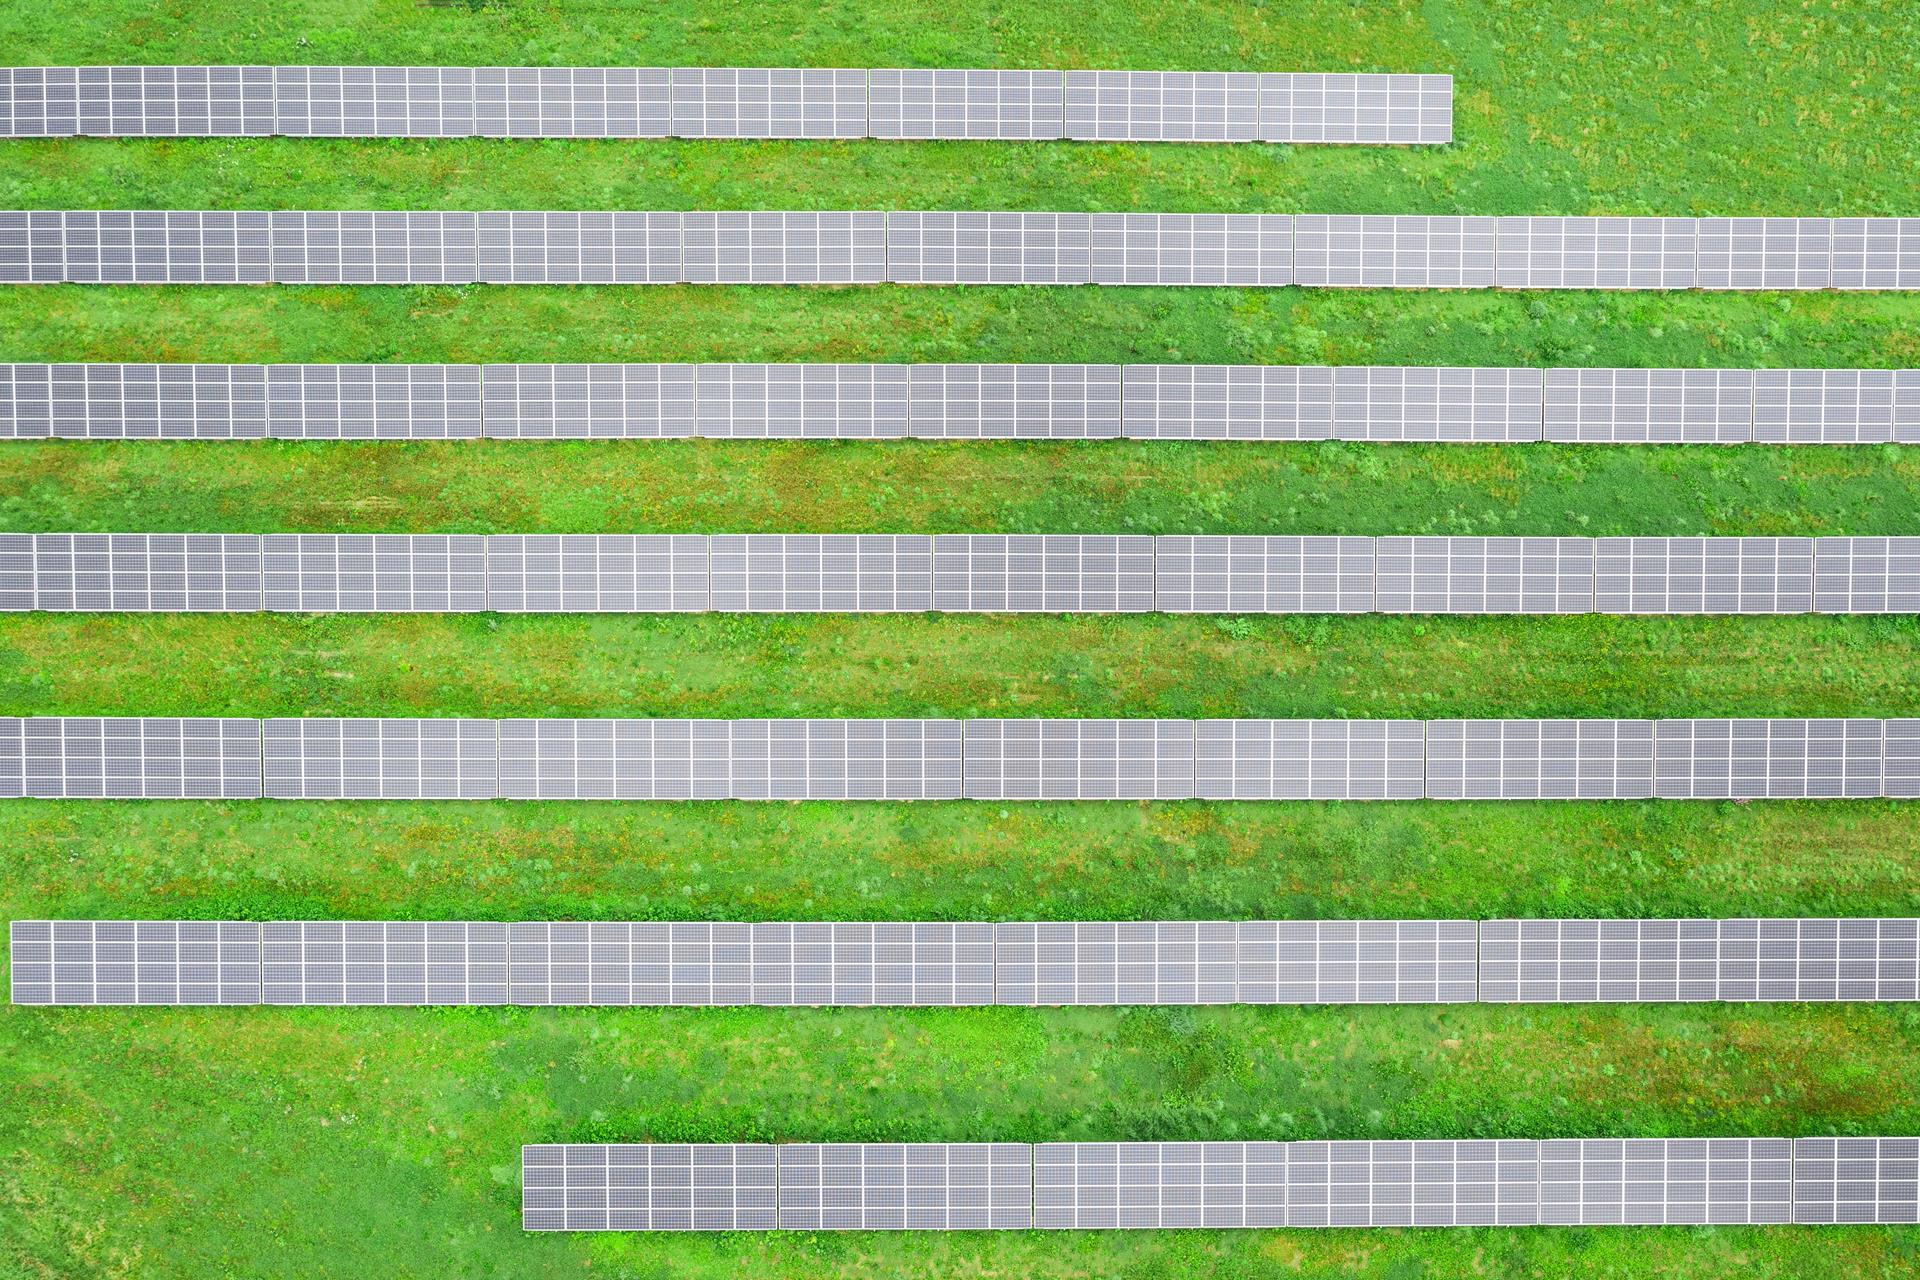 Renewable Energy schemes: what are the implications for landowners?